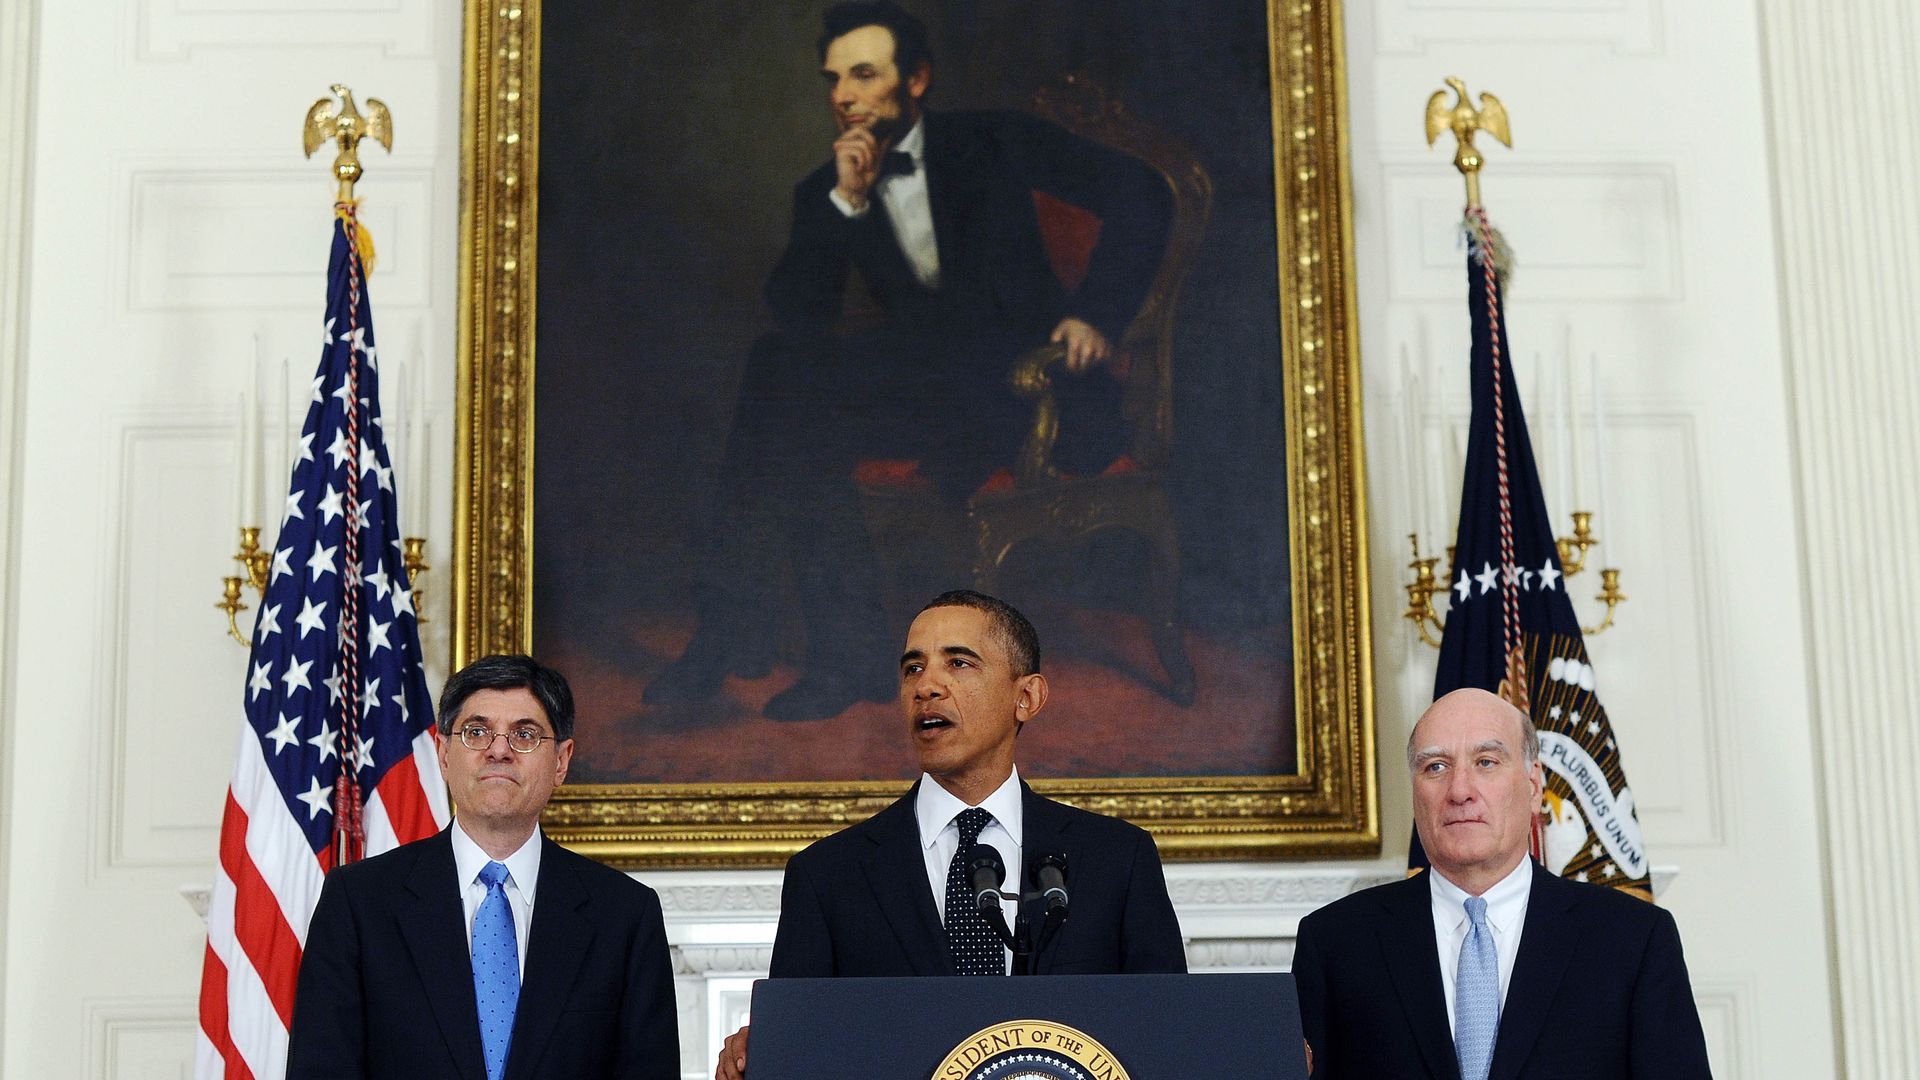 Jack Lew and Bill Daley are seen flanking President Obama as he announces a change in his chief of staff.